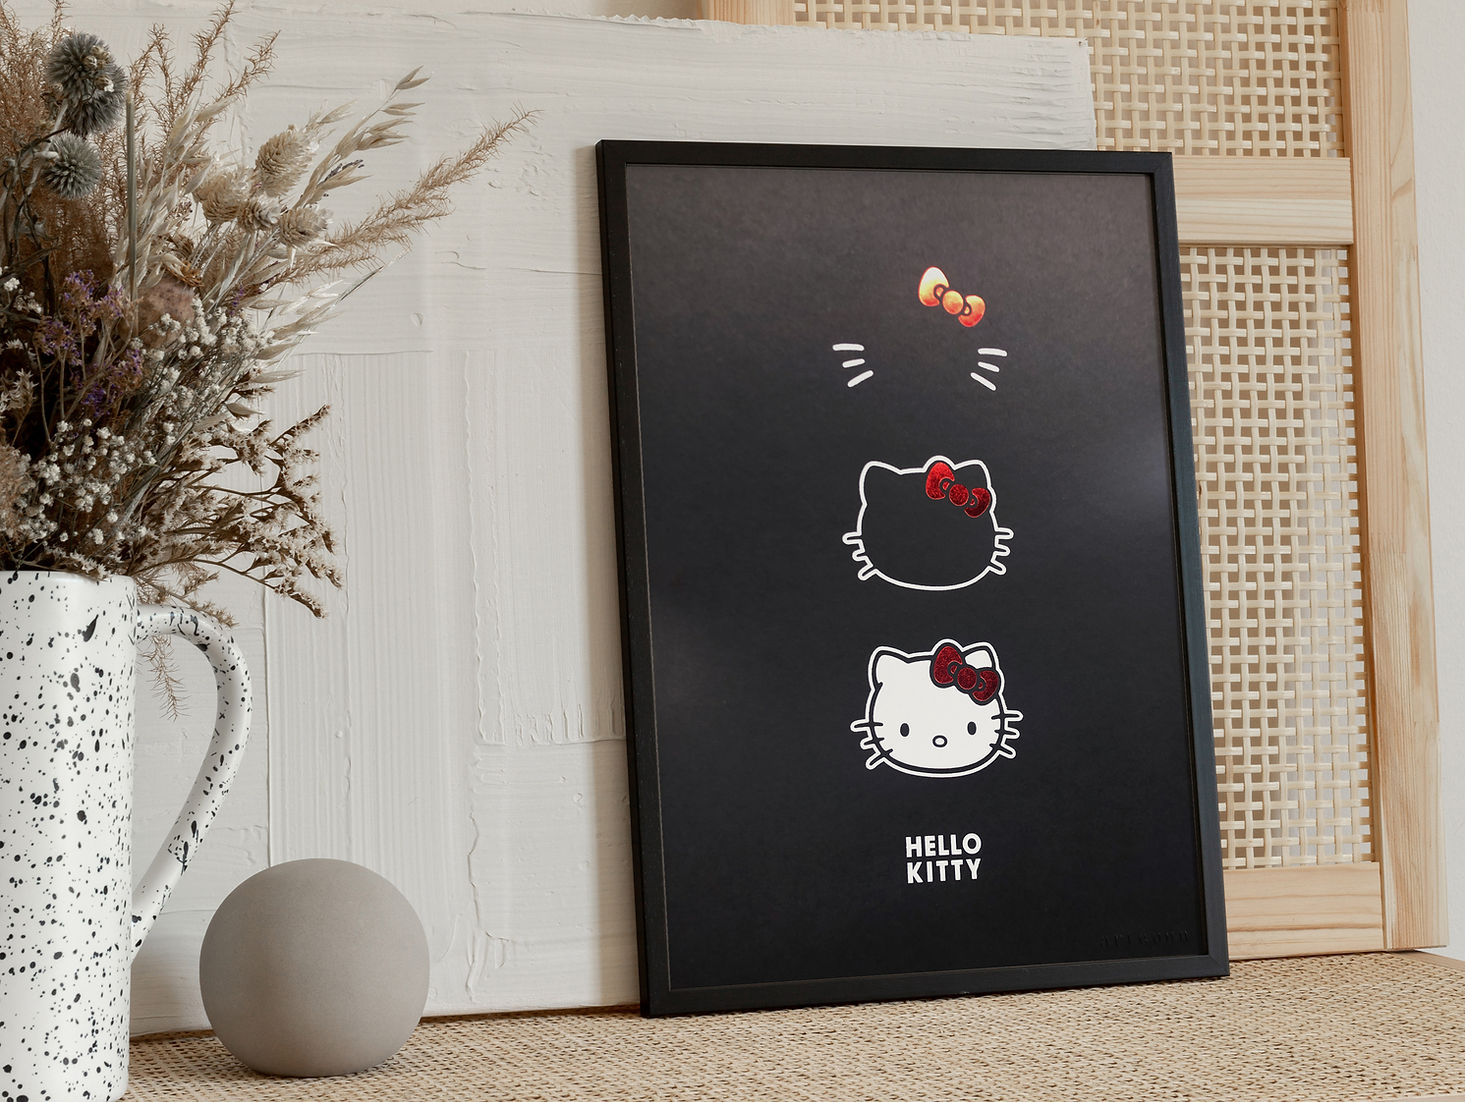 Hello Kitty Three Faces Portrait Iconic Art Print  On Black Paper In A Room